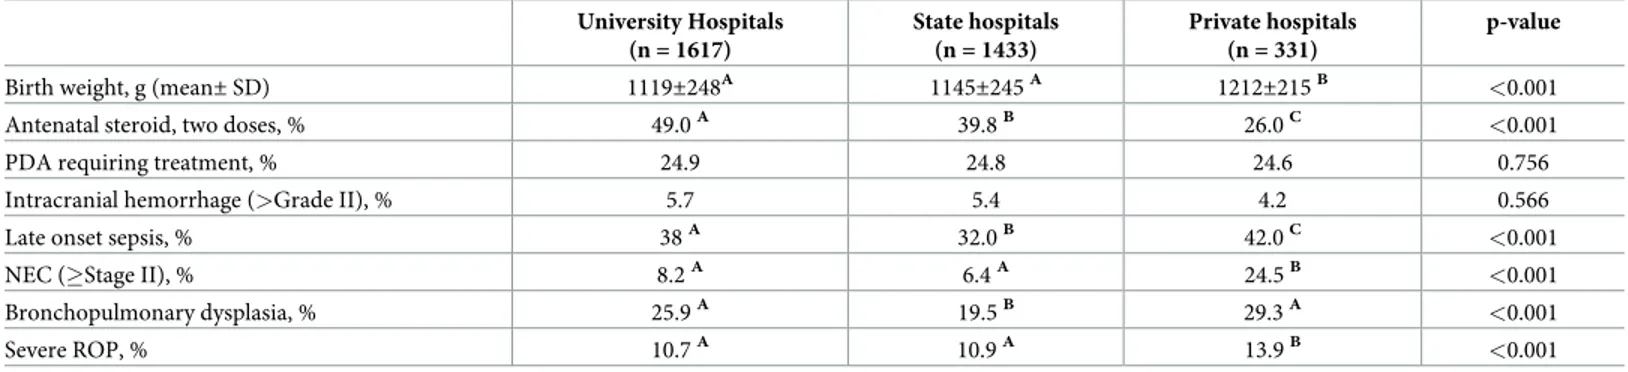 Table 3. The incidence of early neonatal outcomes of VLBW infants among NICUs in university hospitals, in state hospitals and in private hospitals.